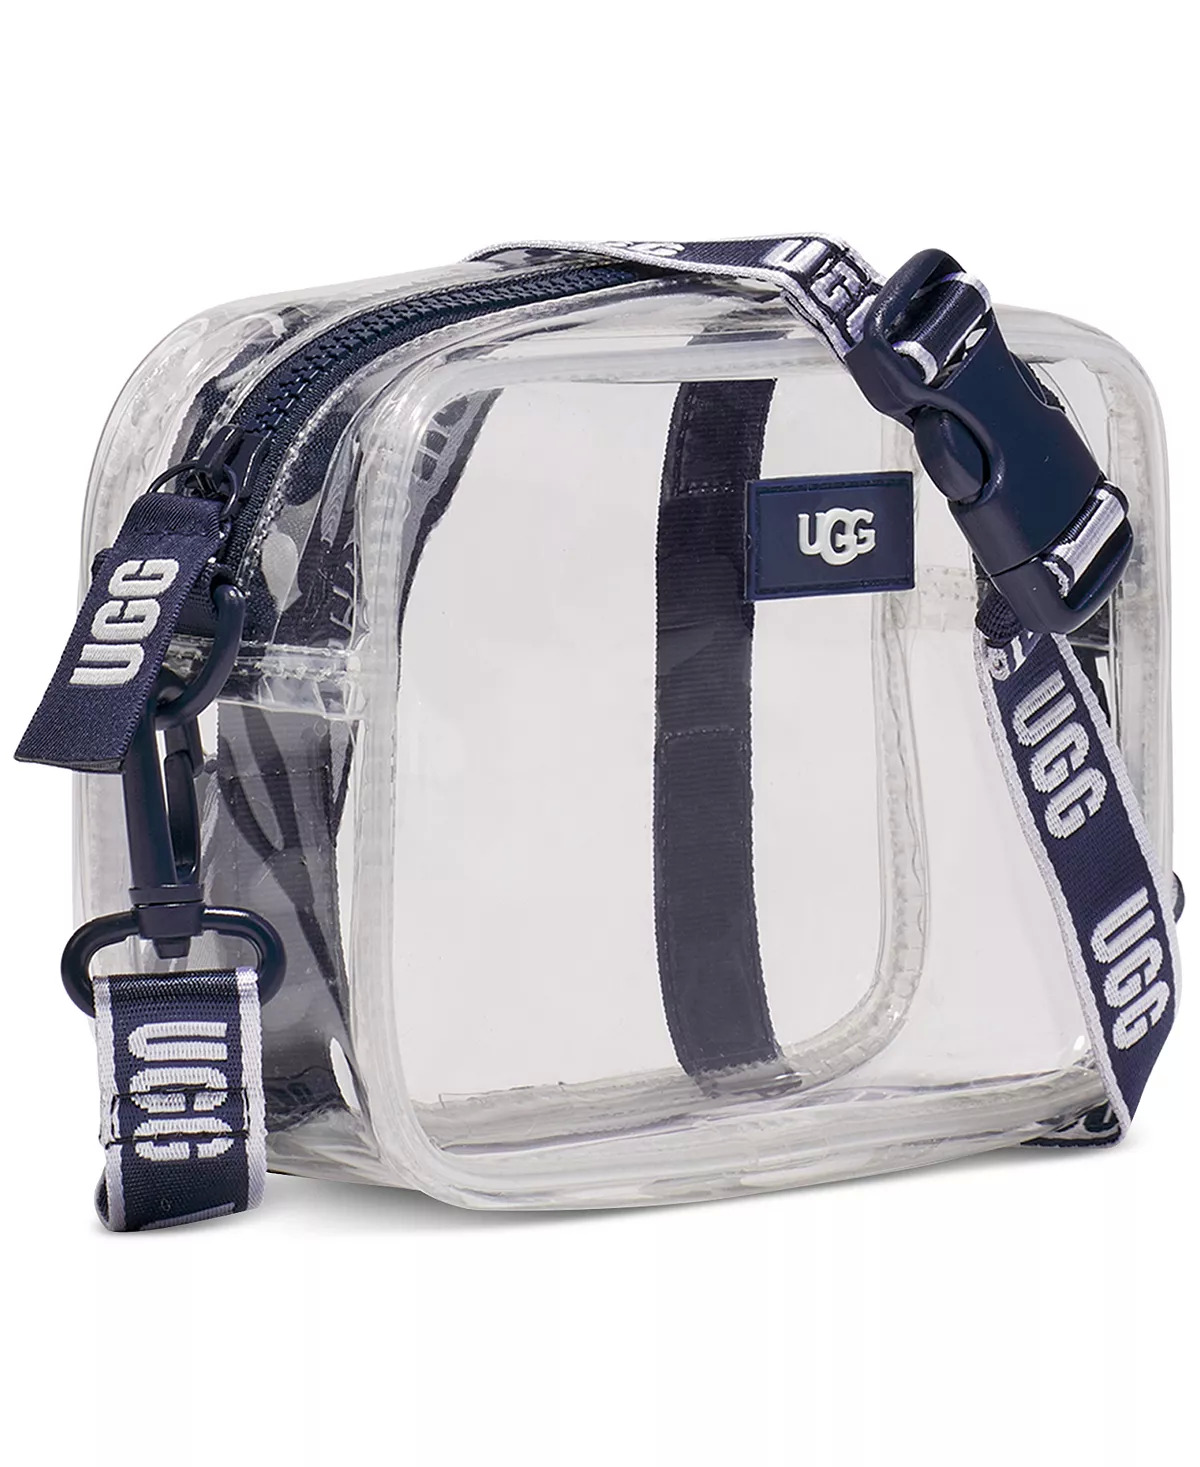 UGG Janey II Transparent Mini Crossbody (Navy, Red, Pink) $37.95 + Free Store Pickup at Macy's or F/S on Orders $25+